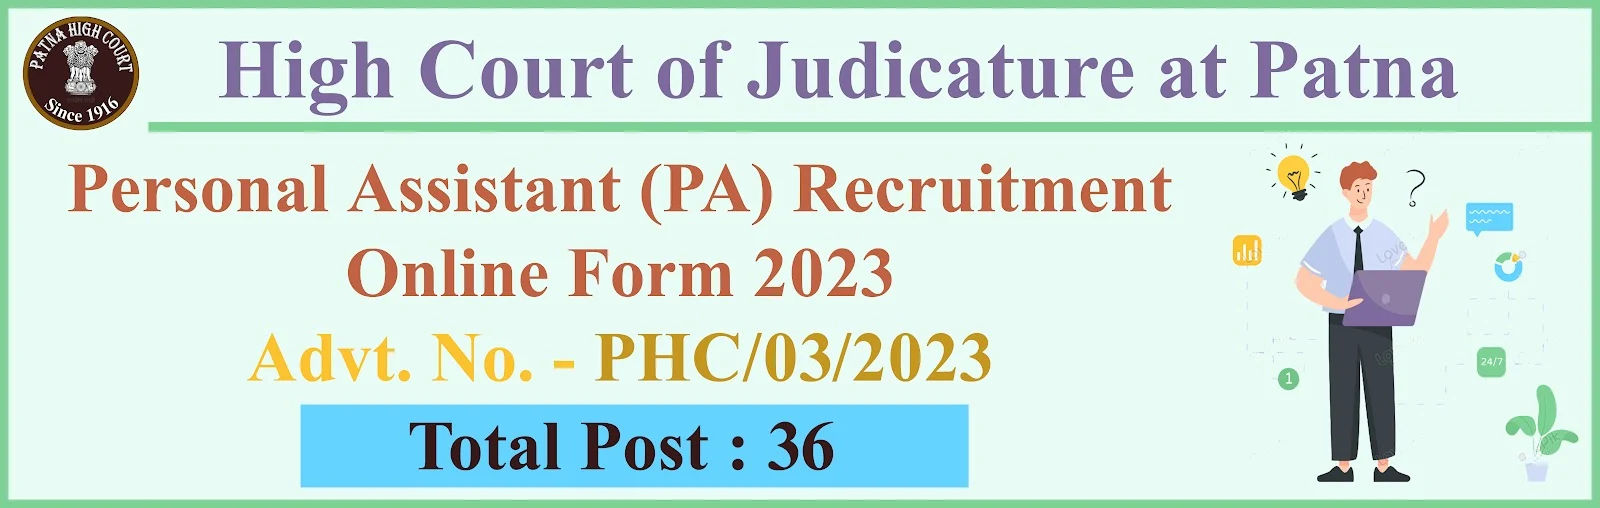 Patna High Court Personal Assistant Online Form 2023